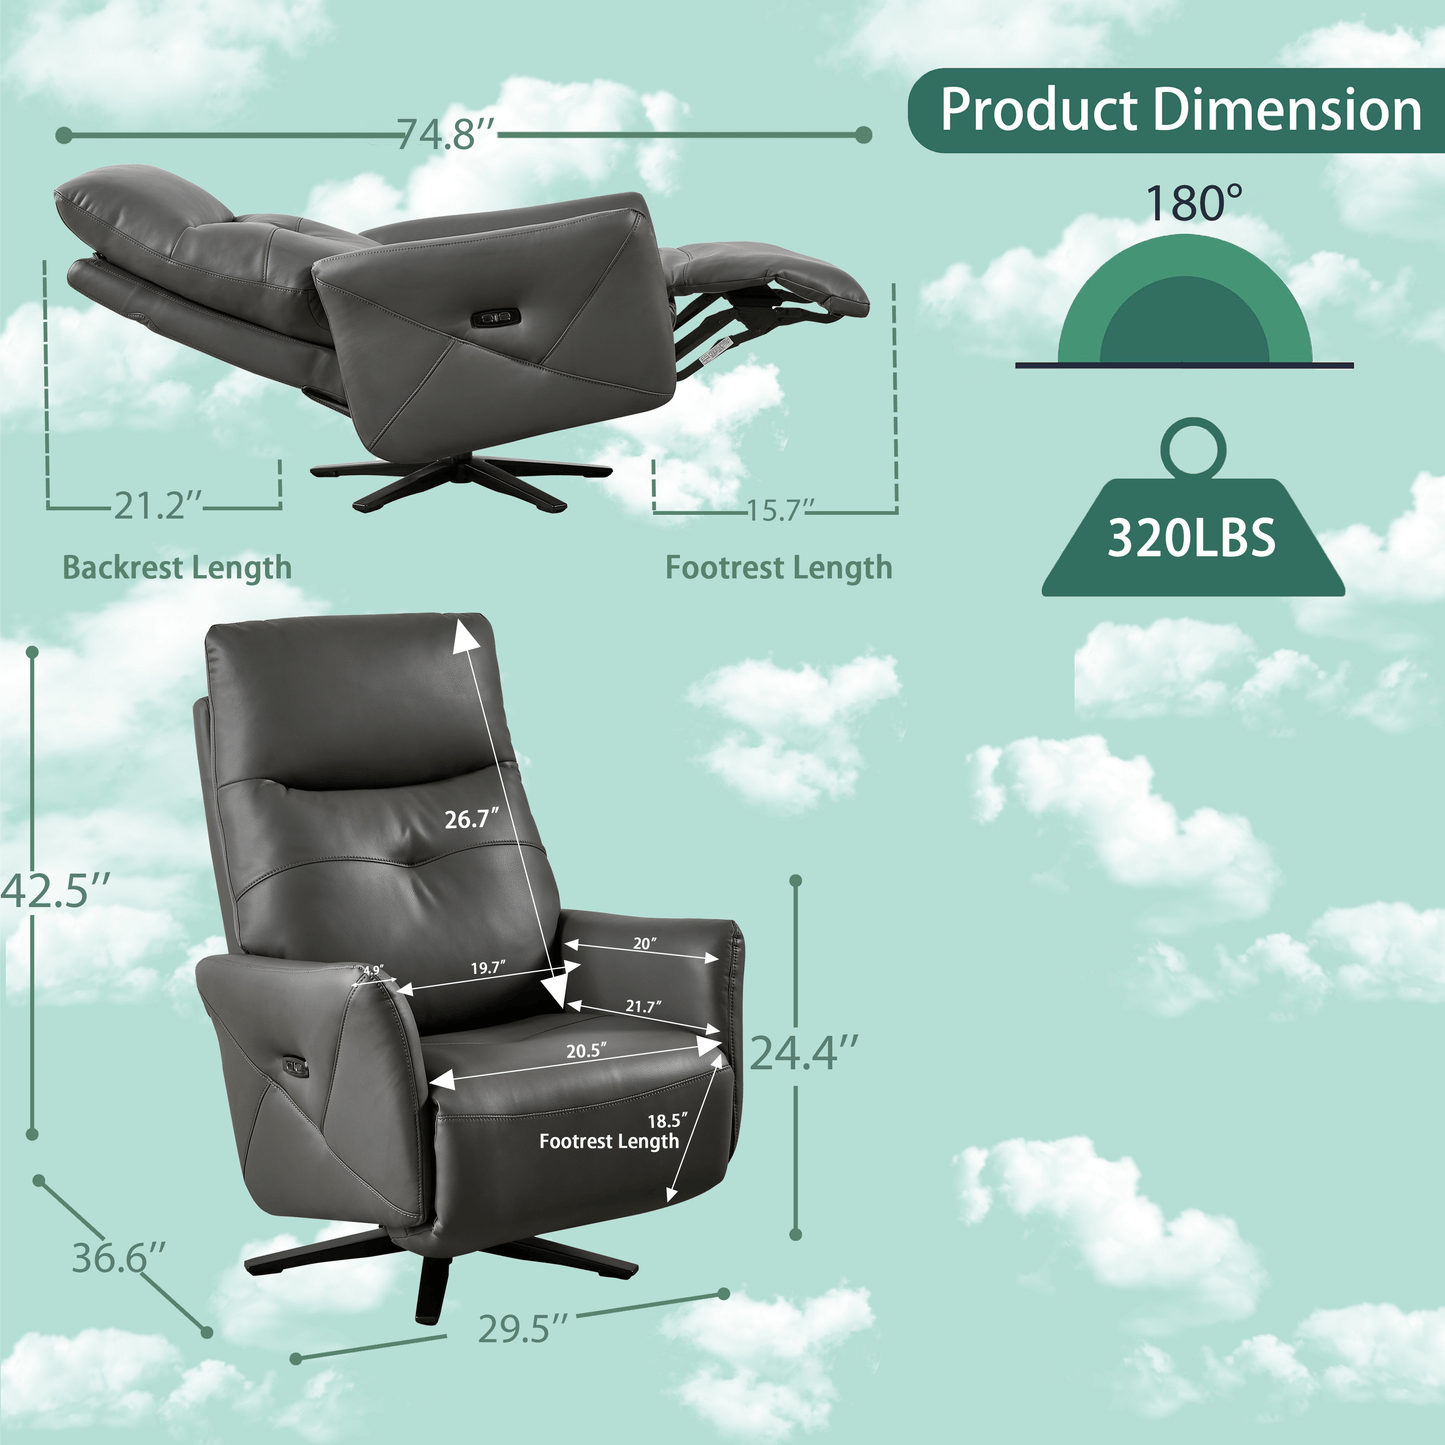 PUG258Y Power Zero Gravity Recliner Chair with Adjustable Headrest,360° Swivel USB Charge Port, Leather - Gray ﻿